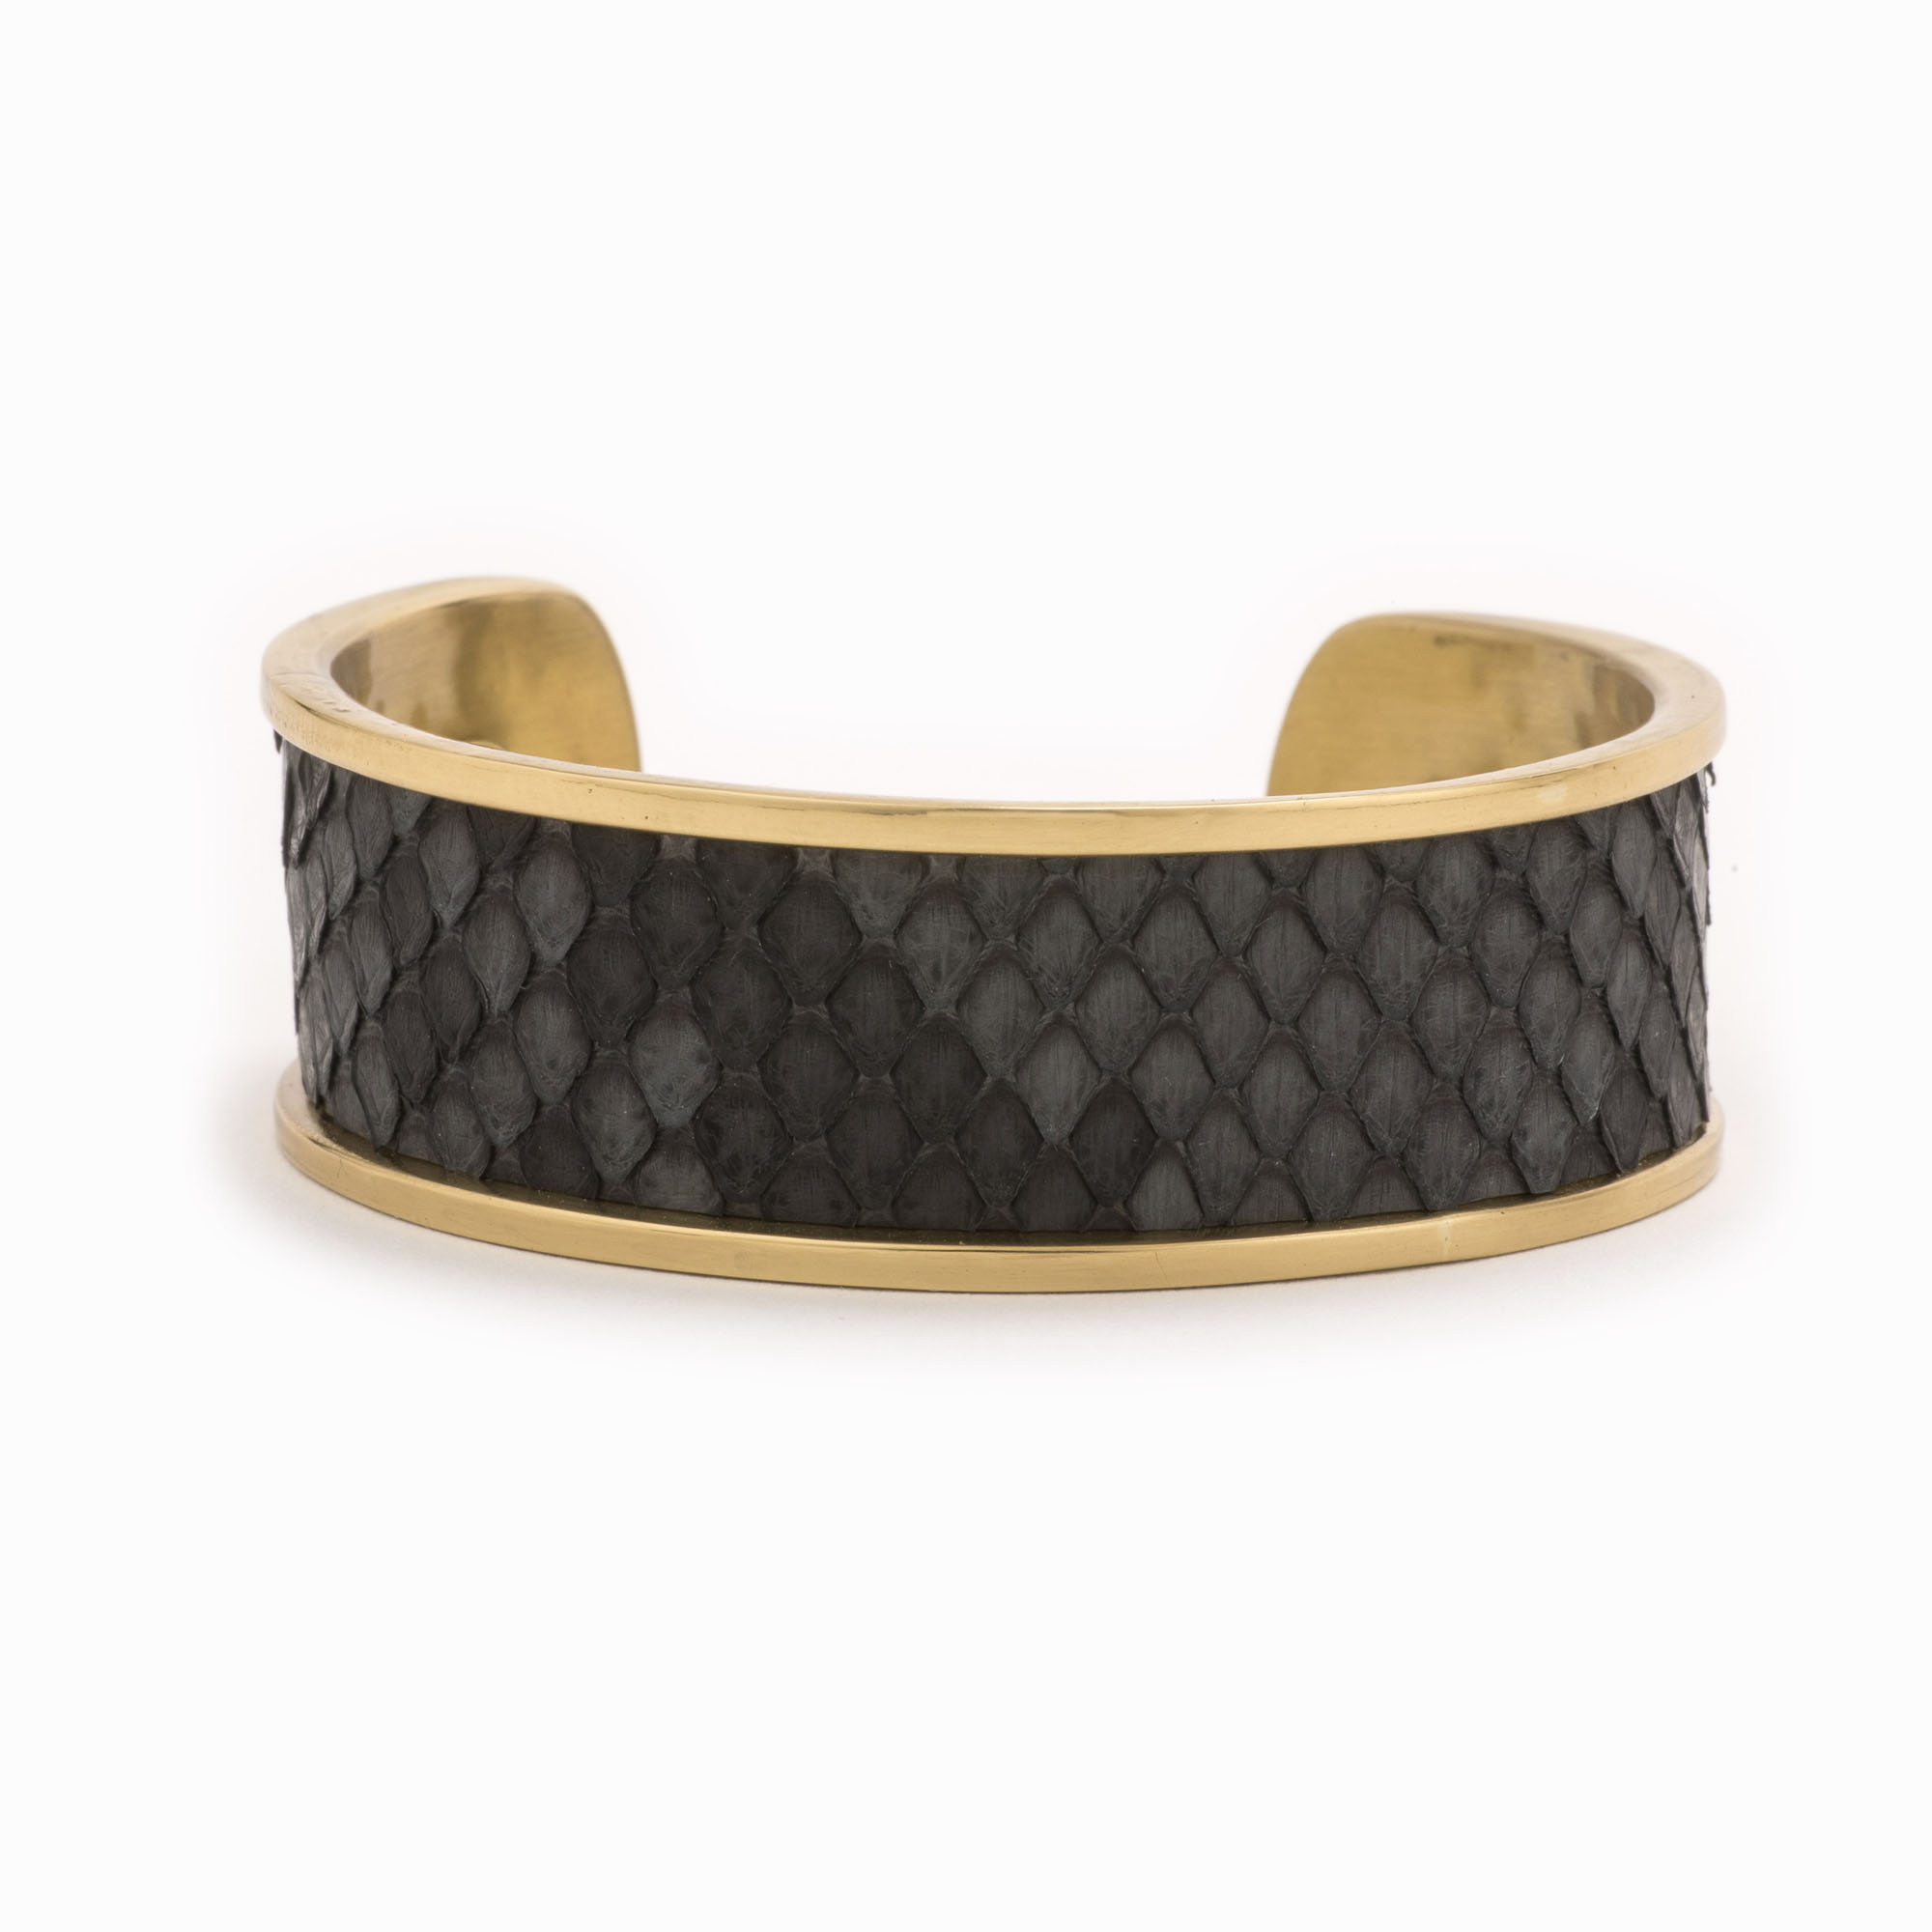 Featured image for “Medium Charcoal Gold Cuff”